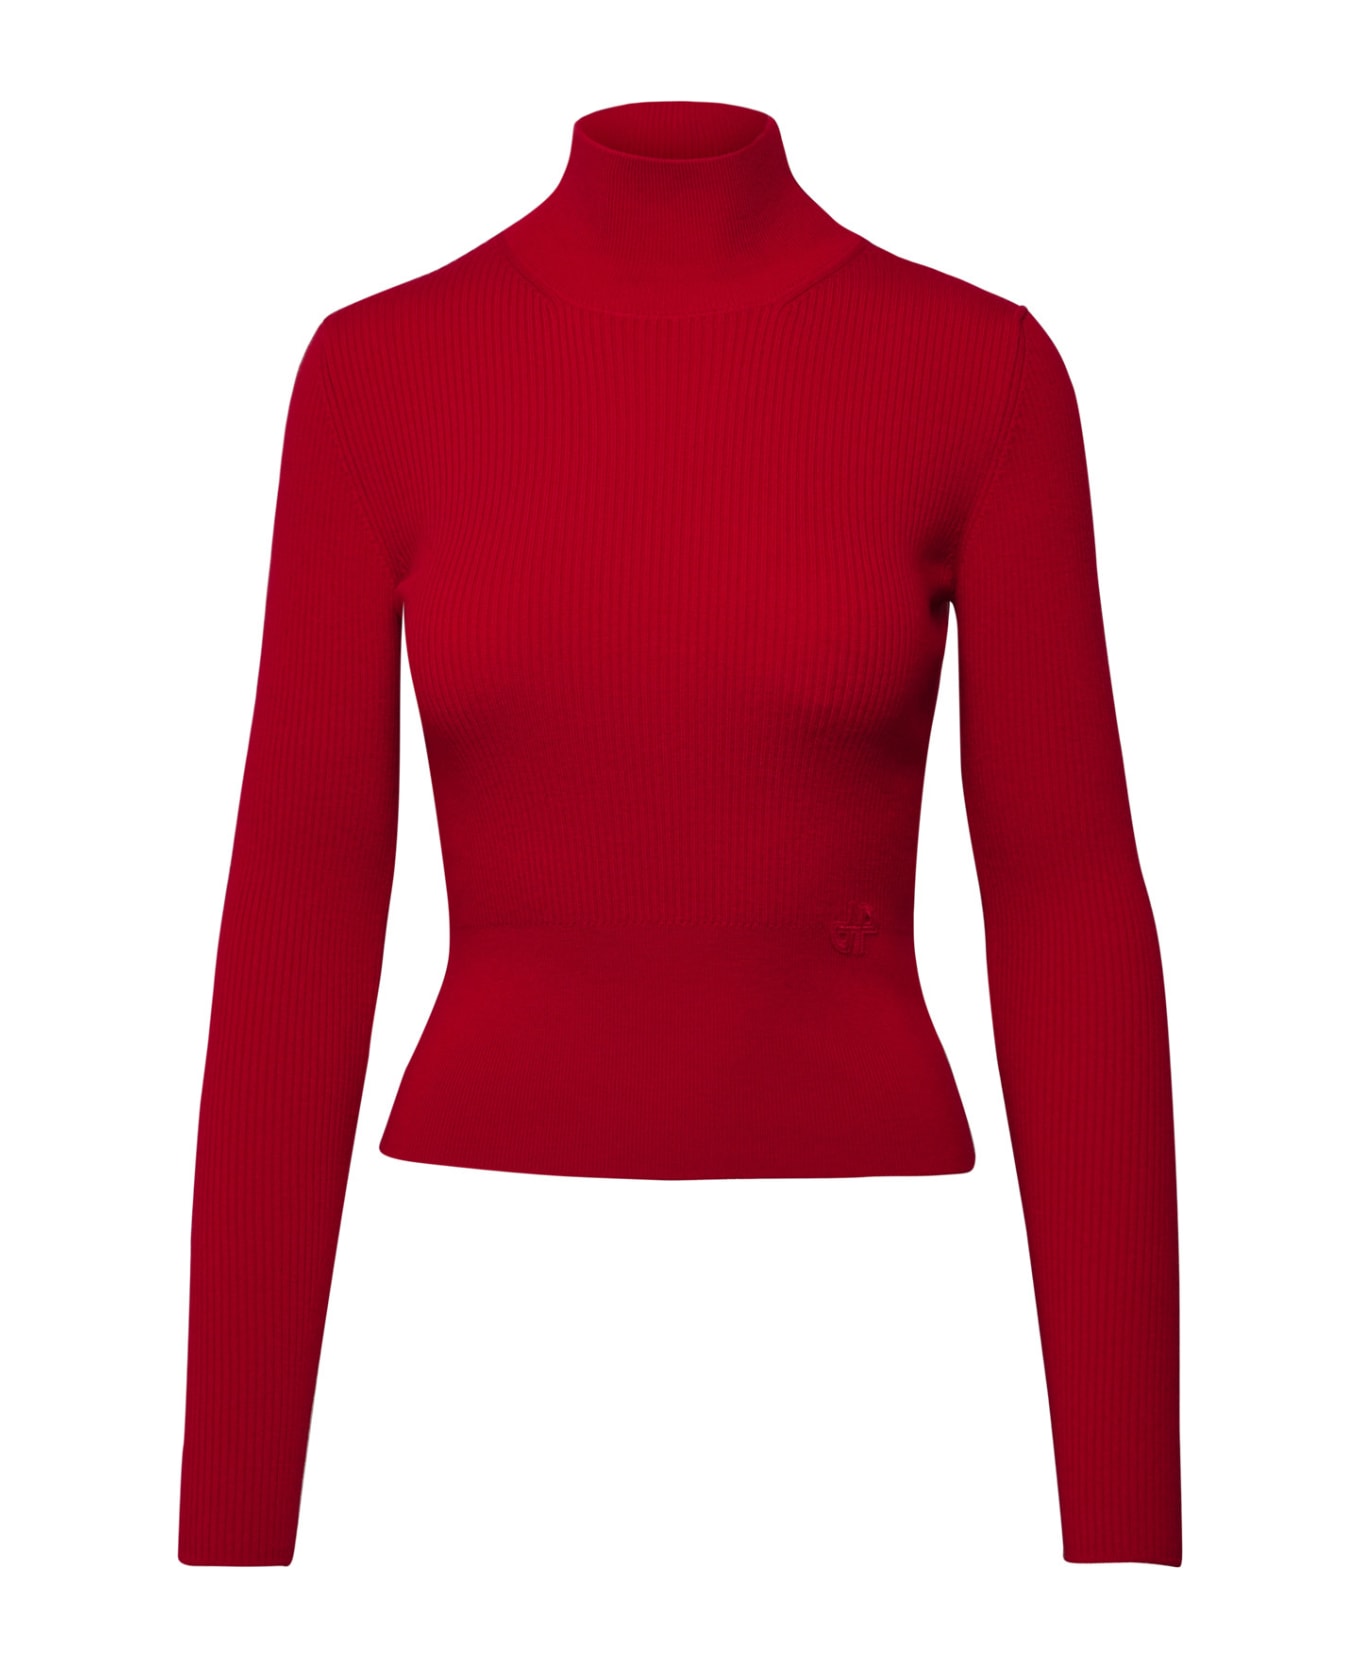 Patou Red Merino Blend Sweater - Red